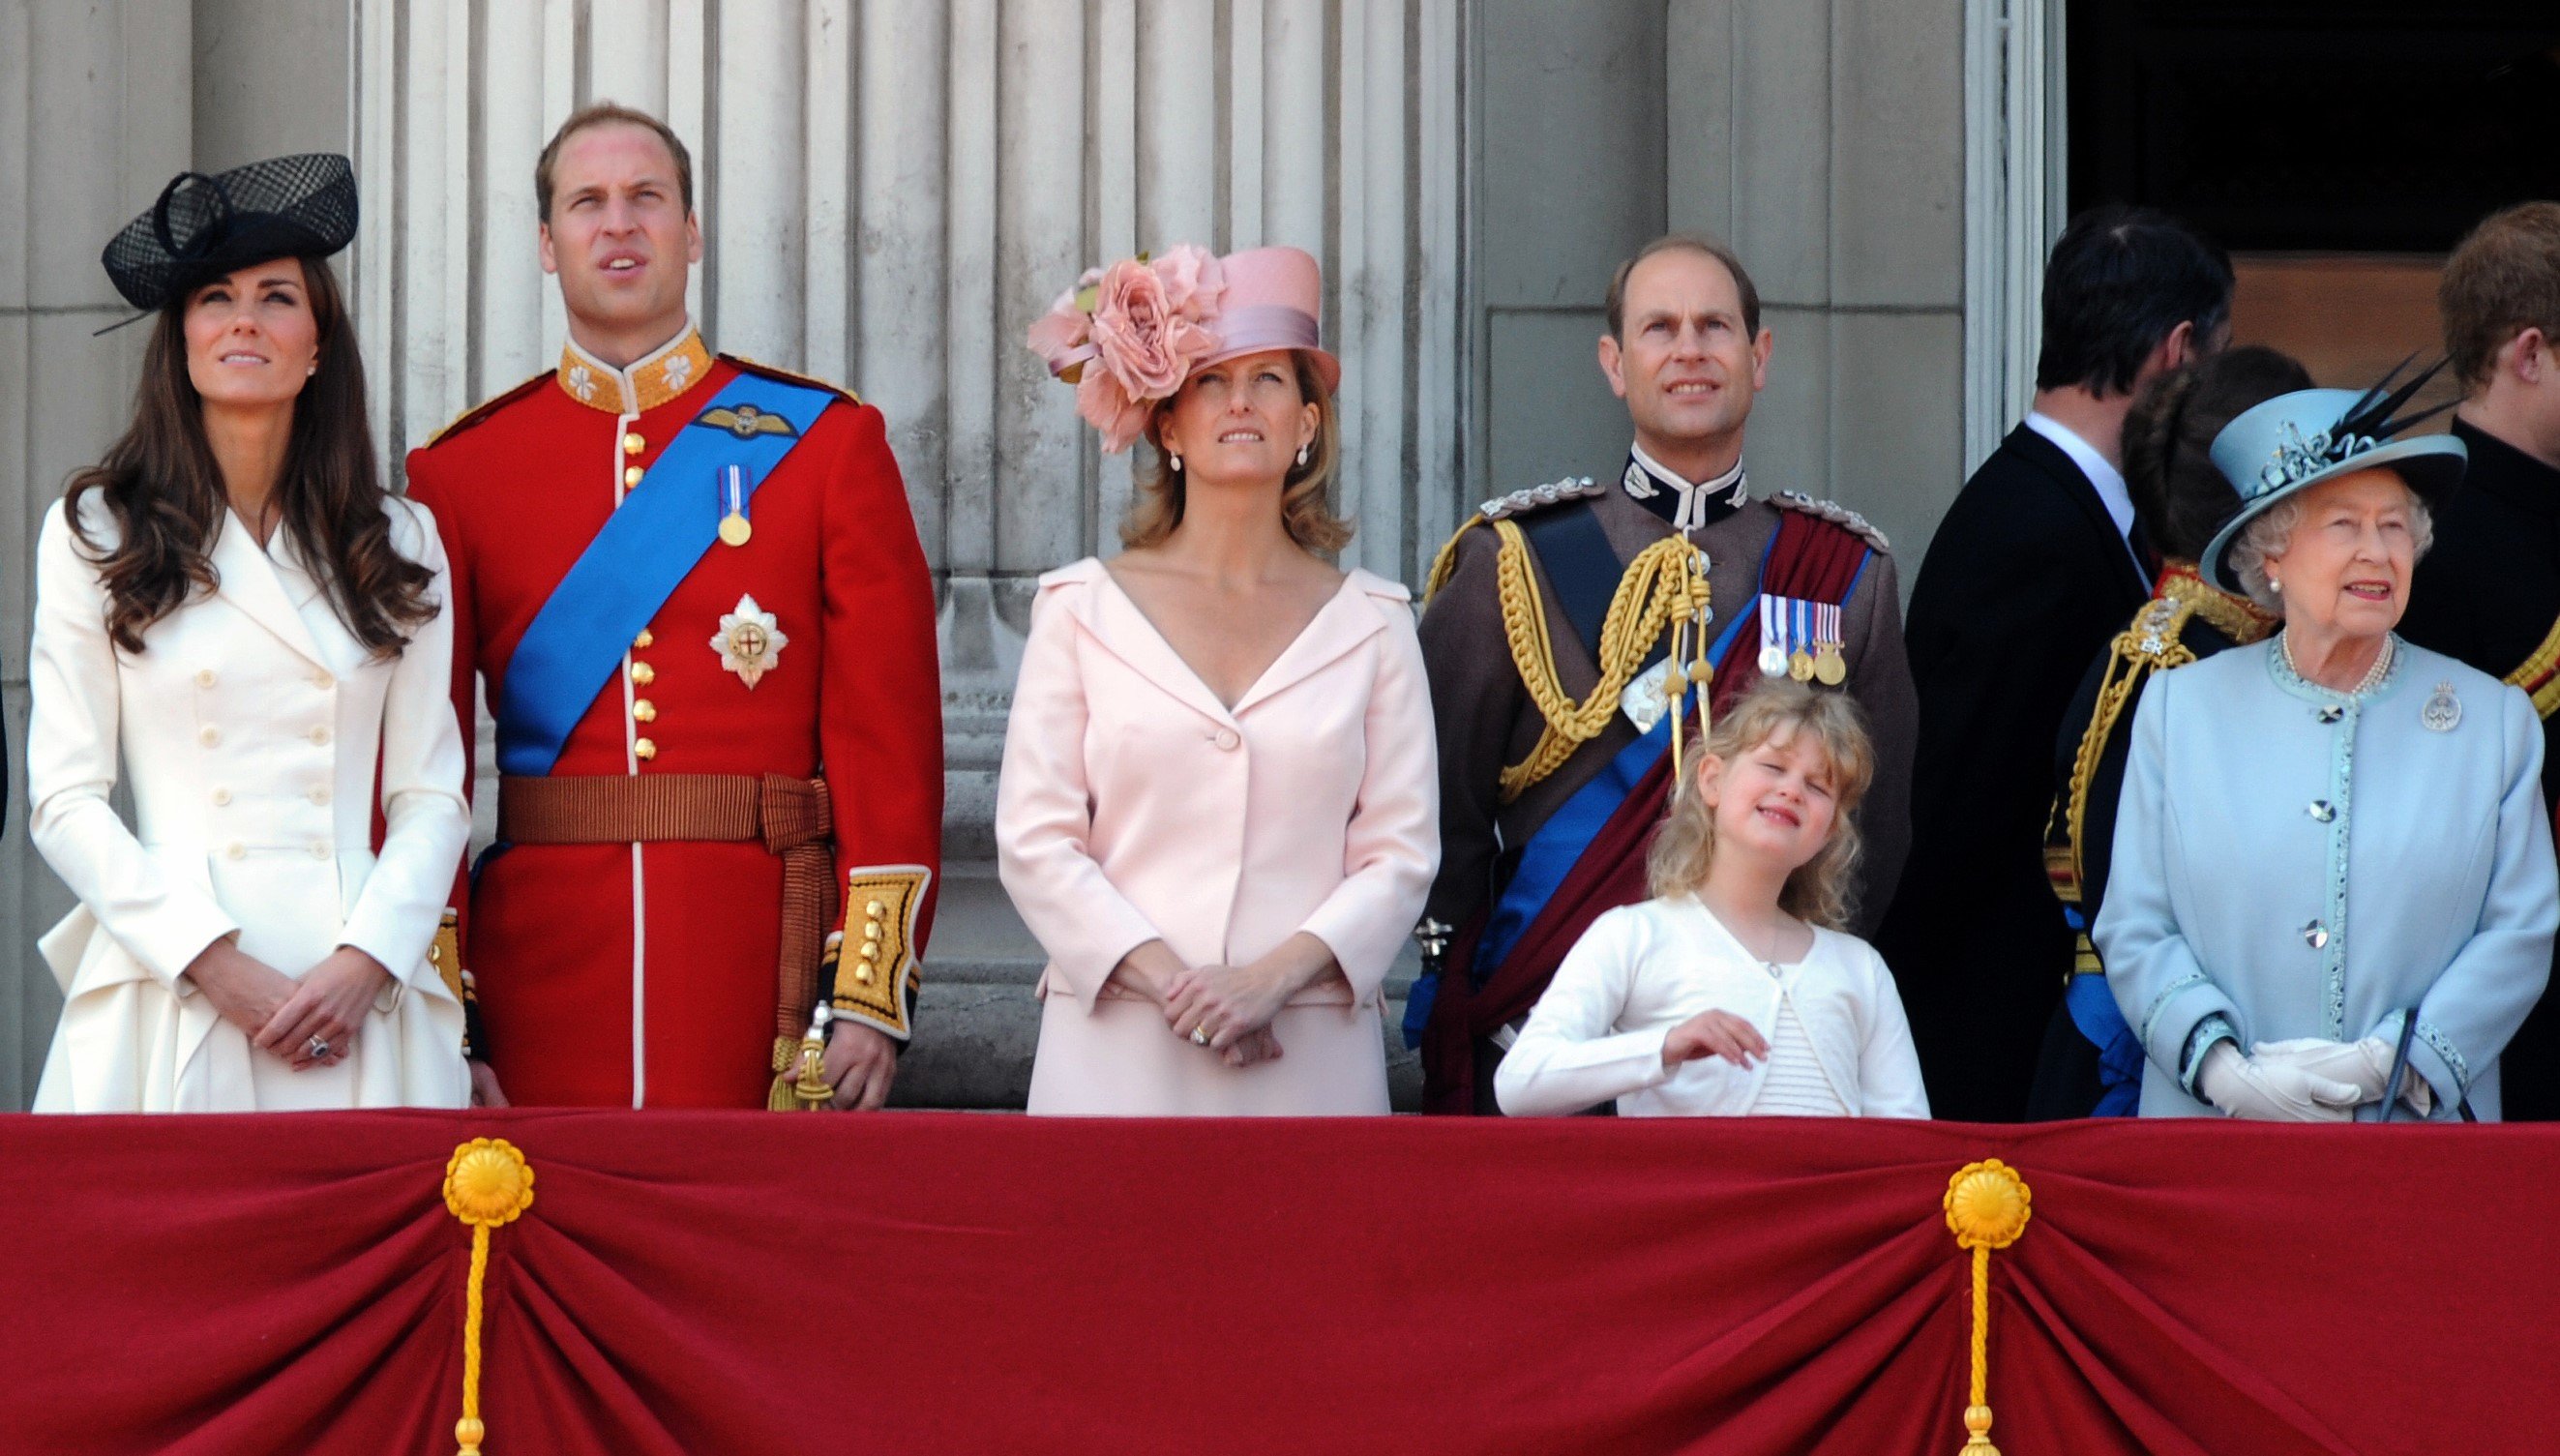 Members of the royal family standing on the balcony of Buckingham Palace following the Trooping The Colour Ceremony